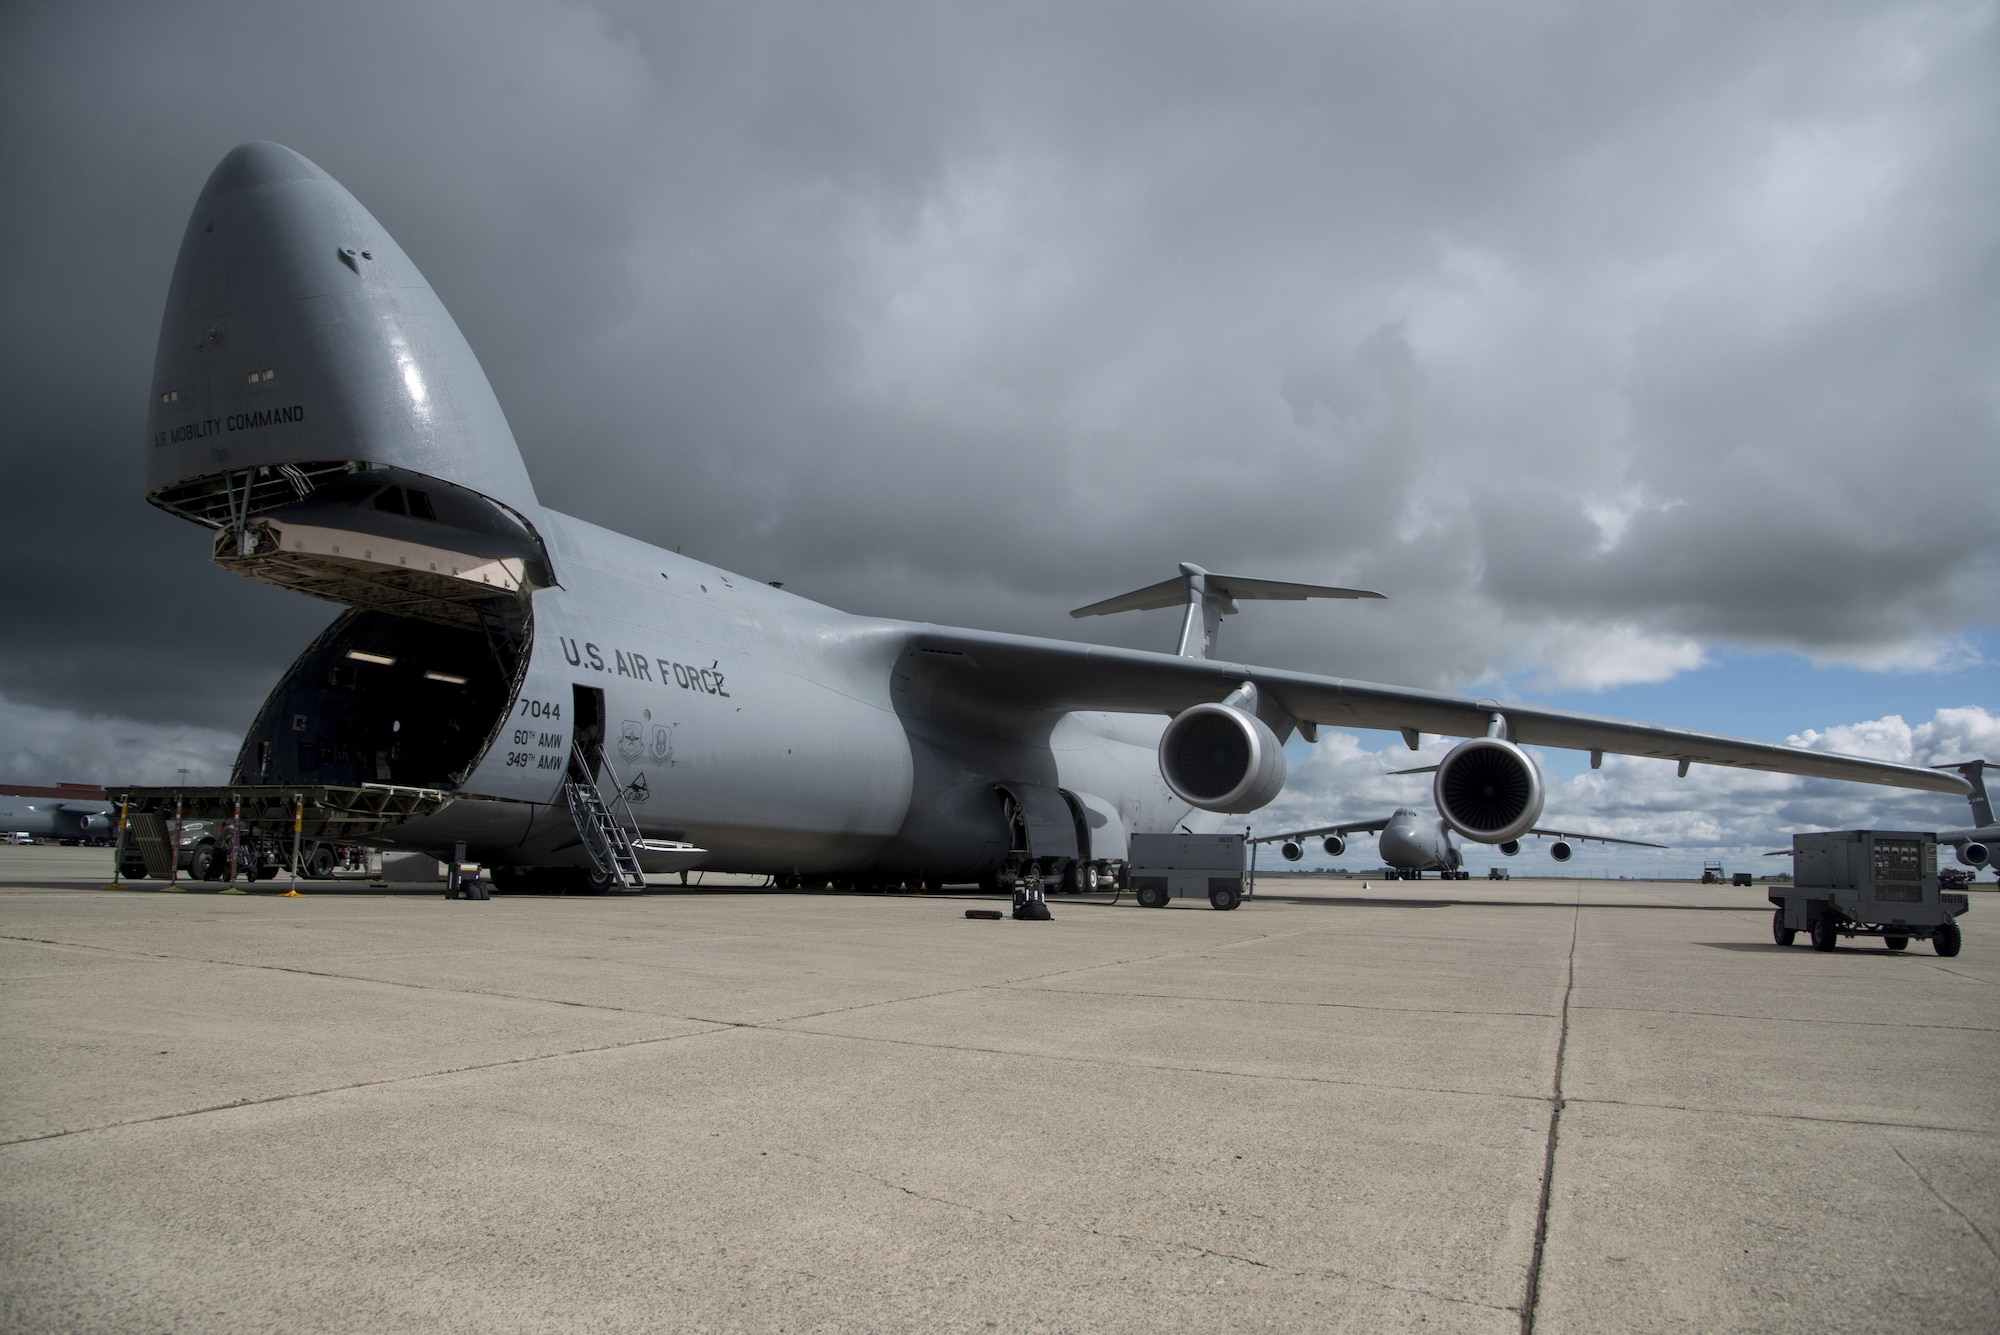 A C-5M Super Galaxy, assigned to the 22nd Airlift Squadron at Travis Air Force Base, California, sits on the ramp prior to a flight to Yokota Air Base, Japan for what's known as a PAC Channel mission March 4, 2017. Since the C-5M upgrade, the aircraft is able to fly direct to Yokota AB without the need to be refueled or make a stop in Hawaii or Alaska. (U.S. Air Force photo/Staff Sgt. Nicole Leidhom)